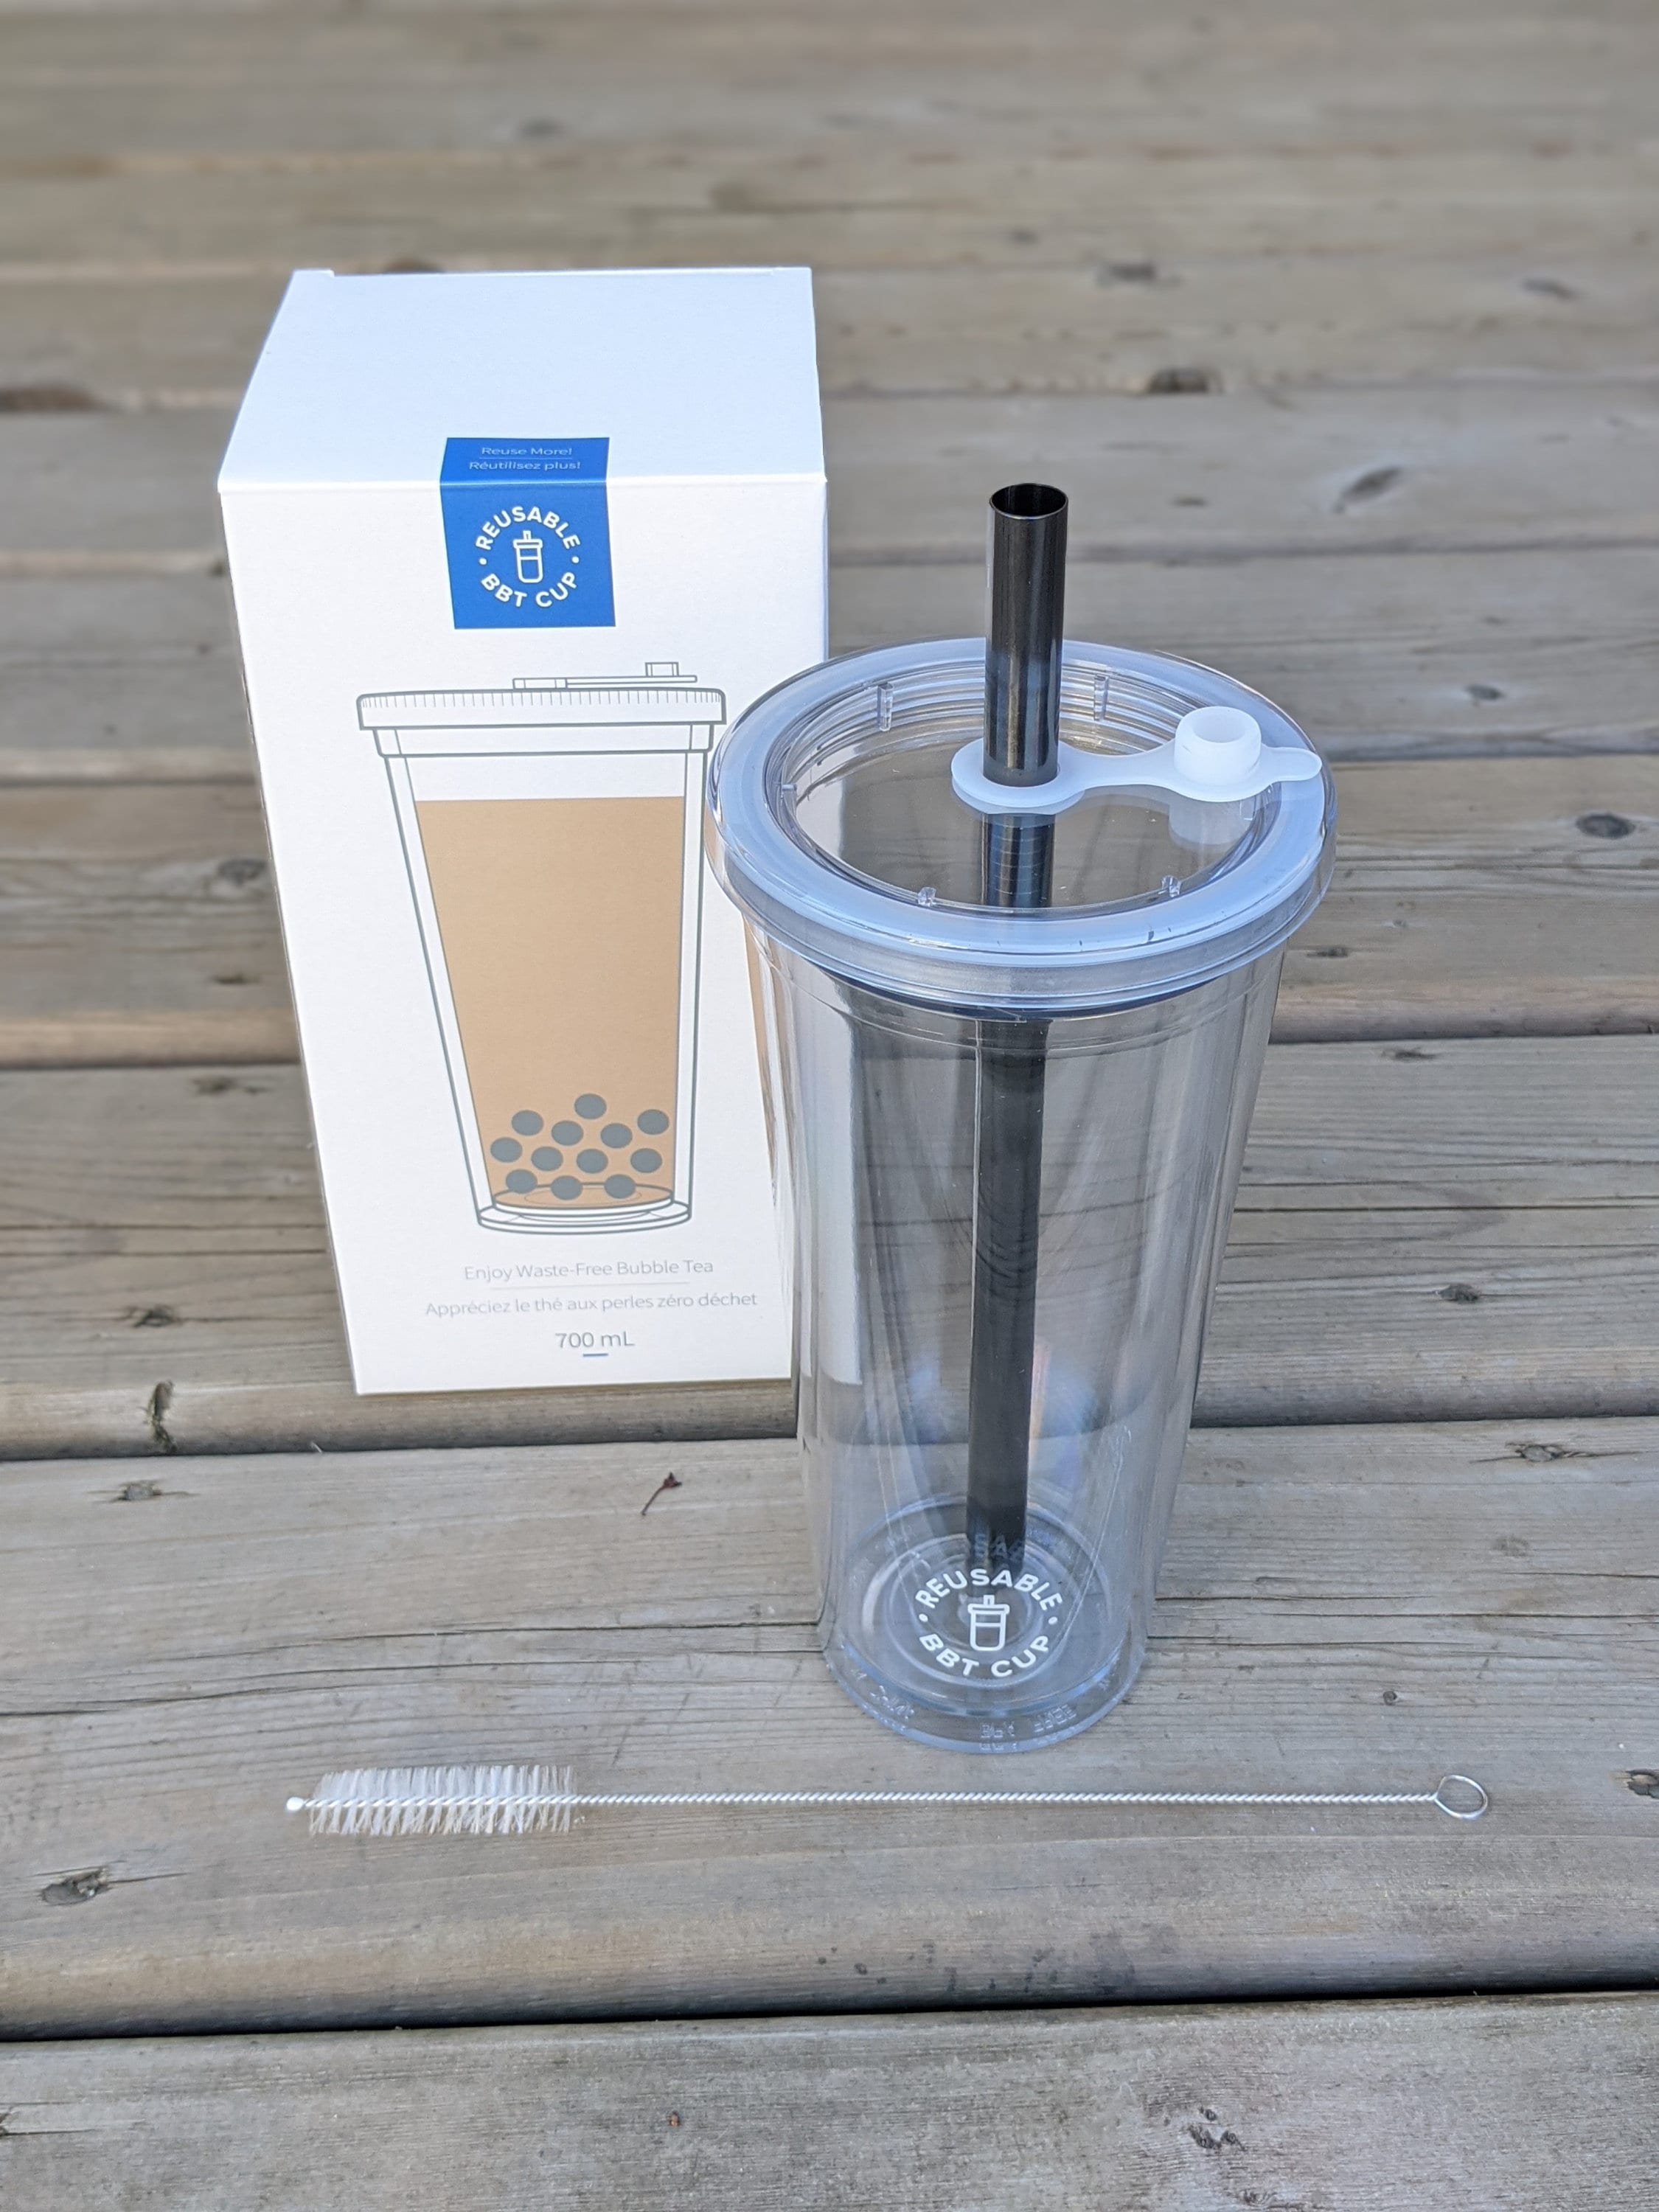 6 Pack Glass Cups Set - Glass Cups with Bamboo Lids and Glass Straw - Cute  Boba Drinking Glasses, Reusable Travel Tumbler Bottle for Iced Coffee